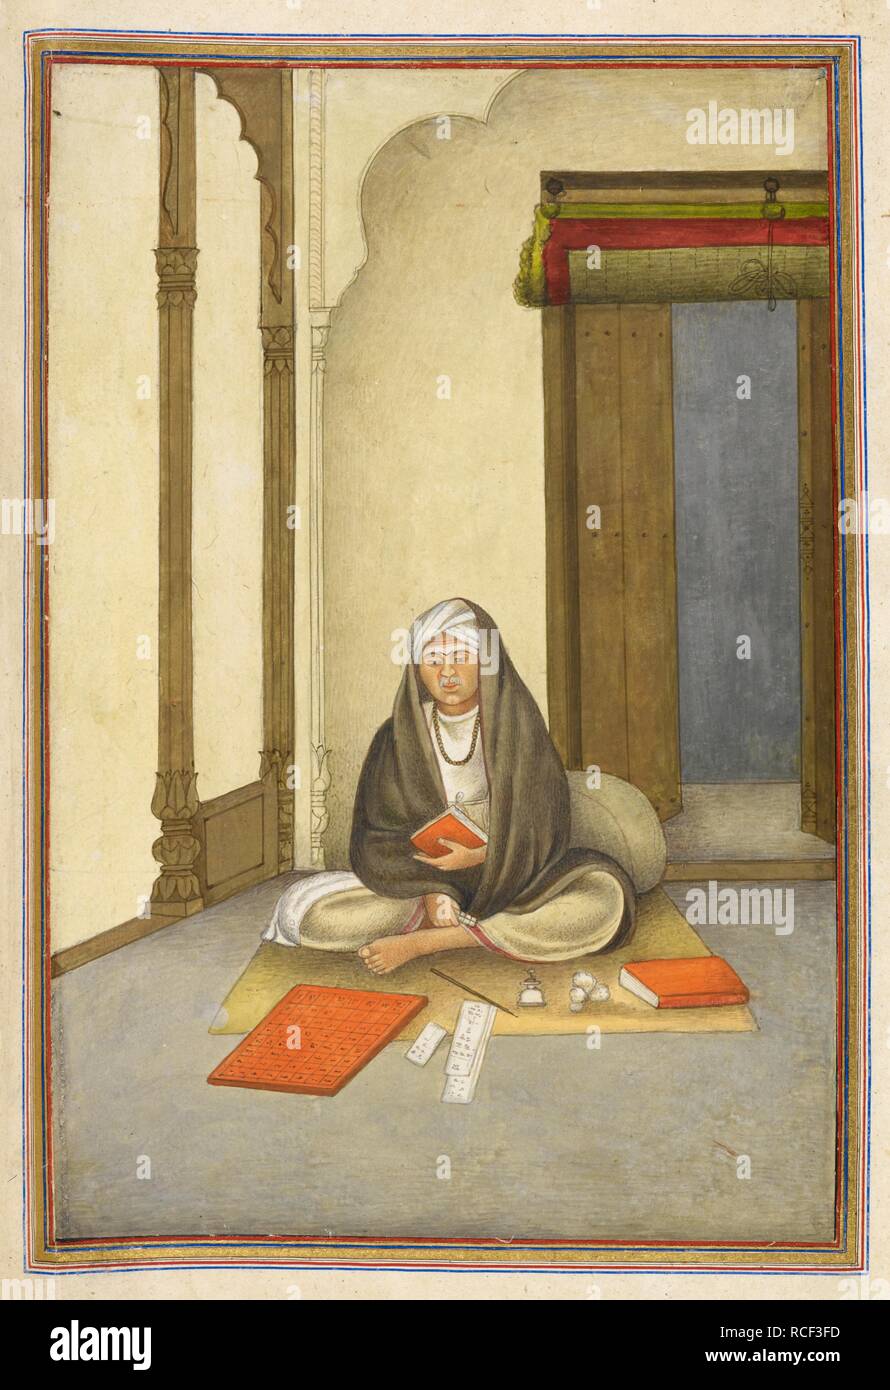 An astrologer with his divination board. Tashrih al-aqvam, an account of origins and occupations of some of the sects, castes and tribes of India. Written at Hansi Cantonment, Hissar District, eighty-five miles north-west of Delhi for Colonel James Skinner. 1825. Source: Add. 27255, f.106v. Language: Persian. Author: ANON. Stock Photo